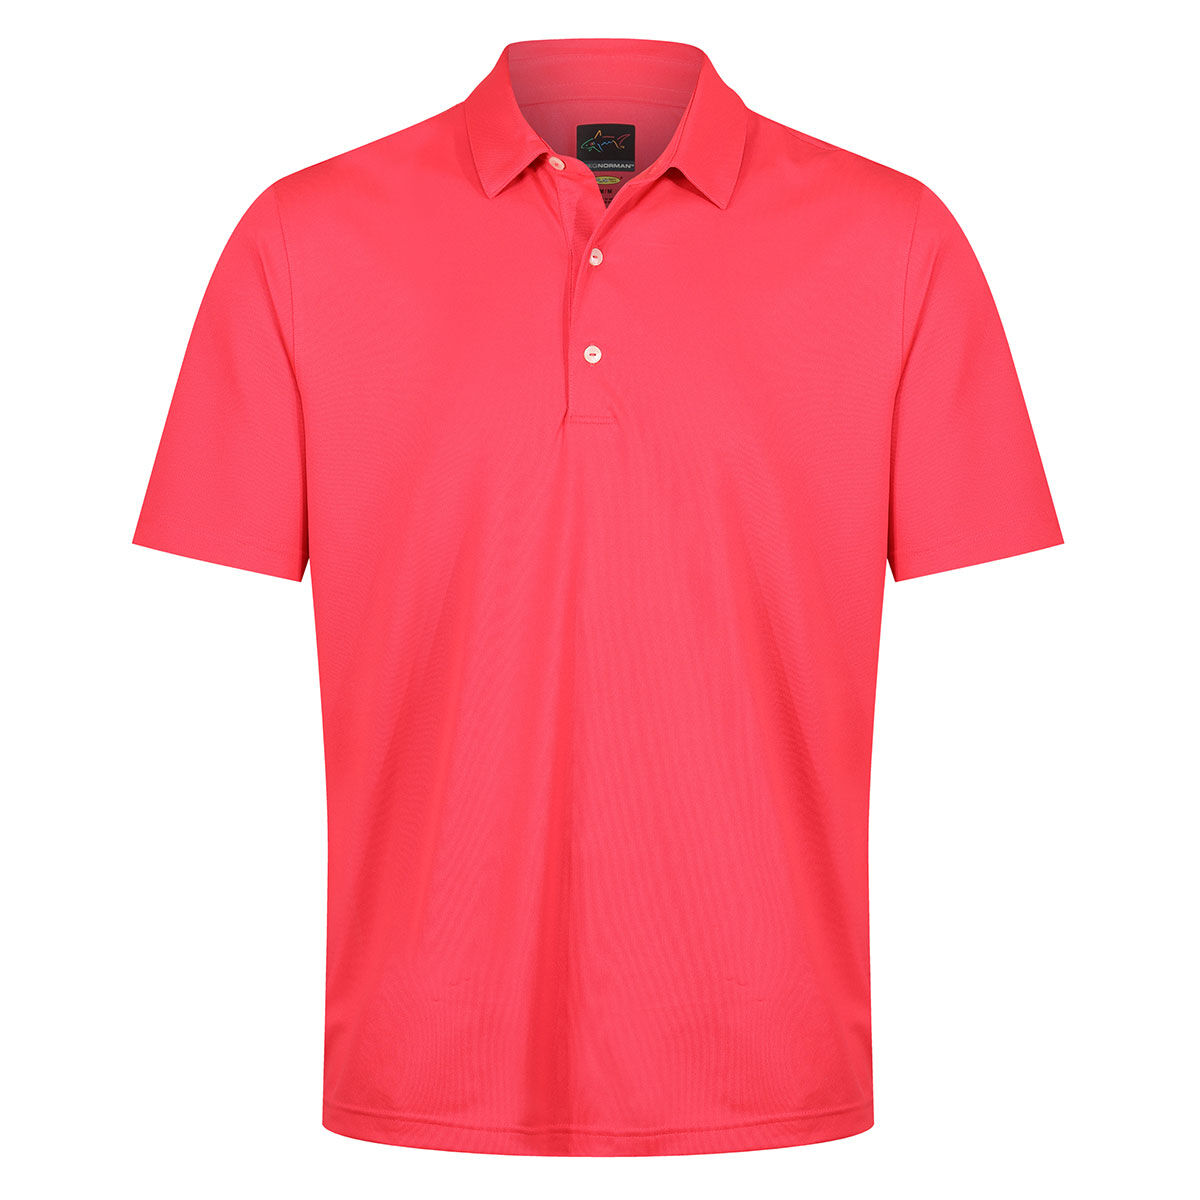 Greg Norman Men’s Neck Logo Stretch Golf Polo Shirt, Mens, Coral sunset, Large | American Golf